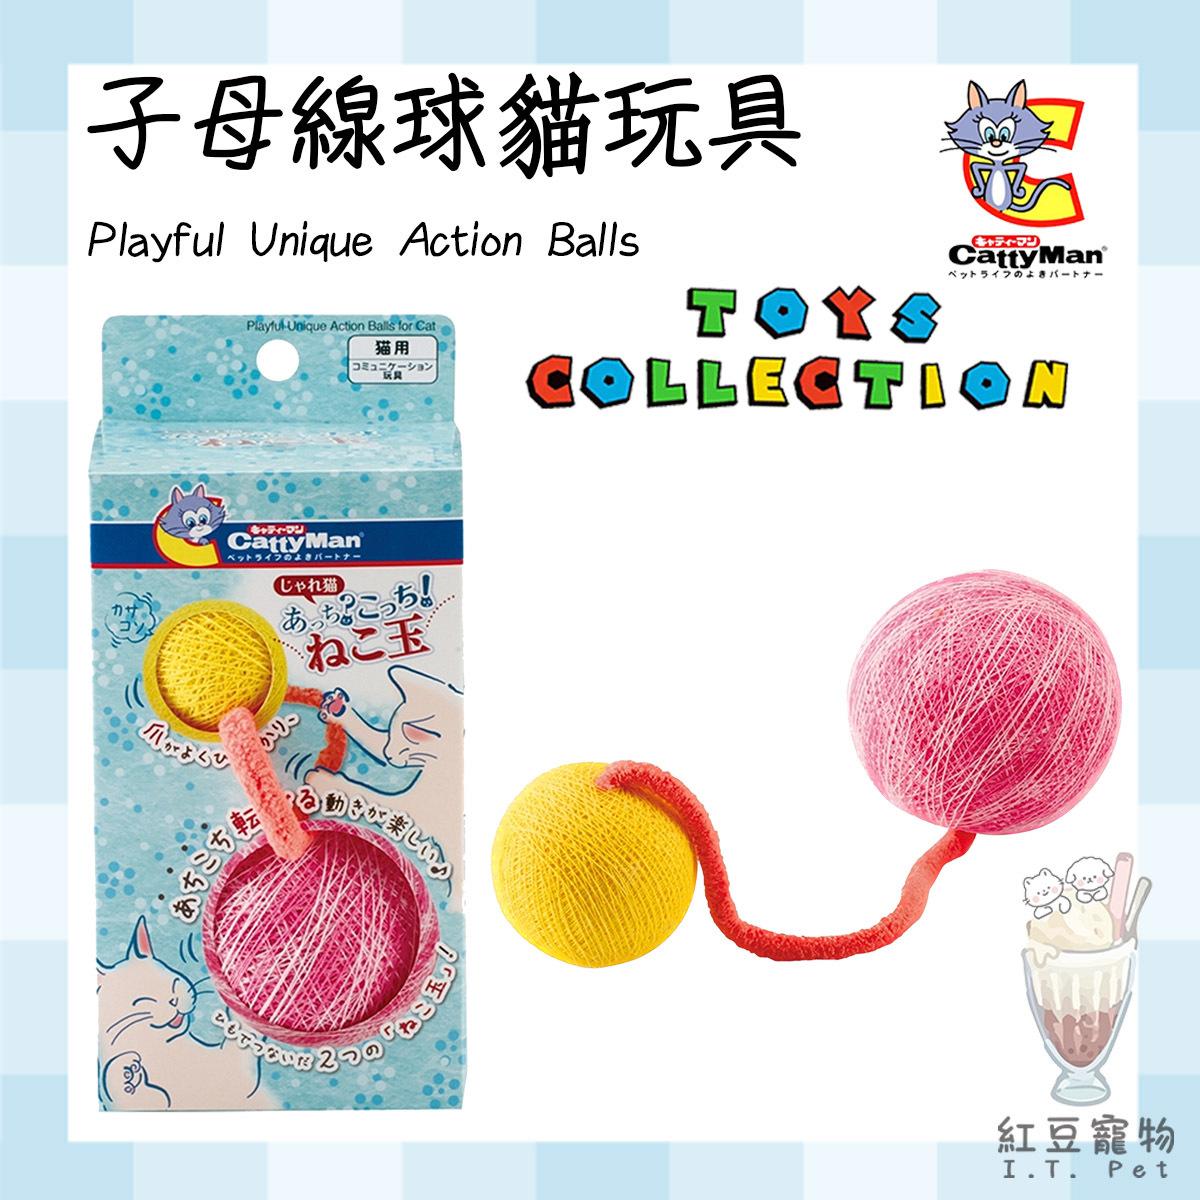 Playful Unique Action Balls #Catty #toy